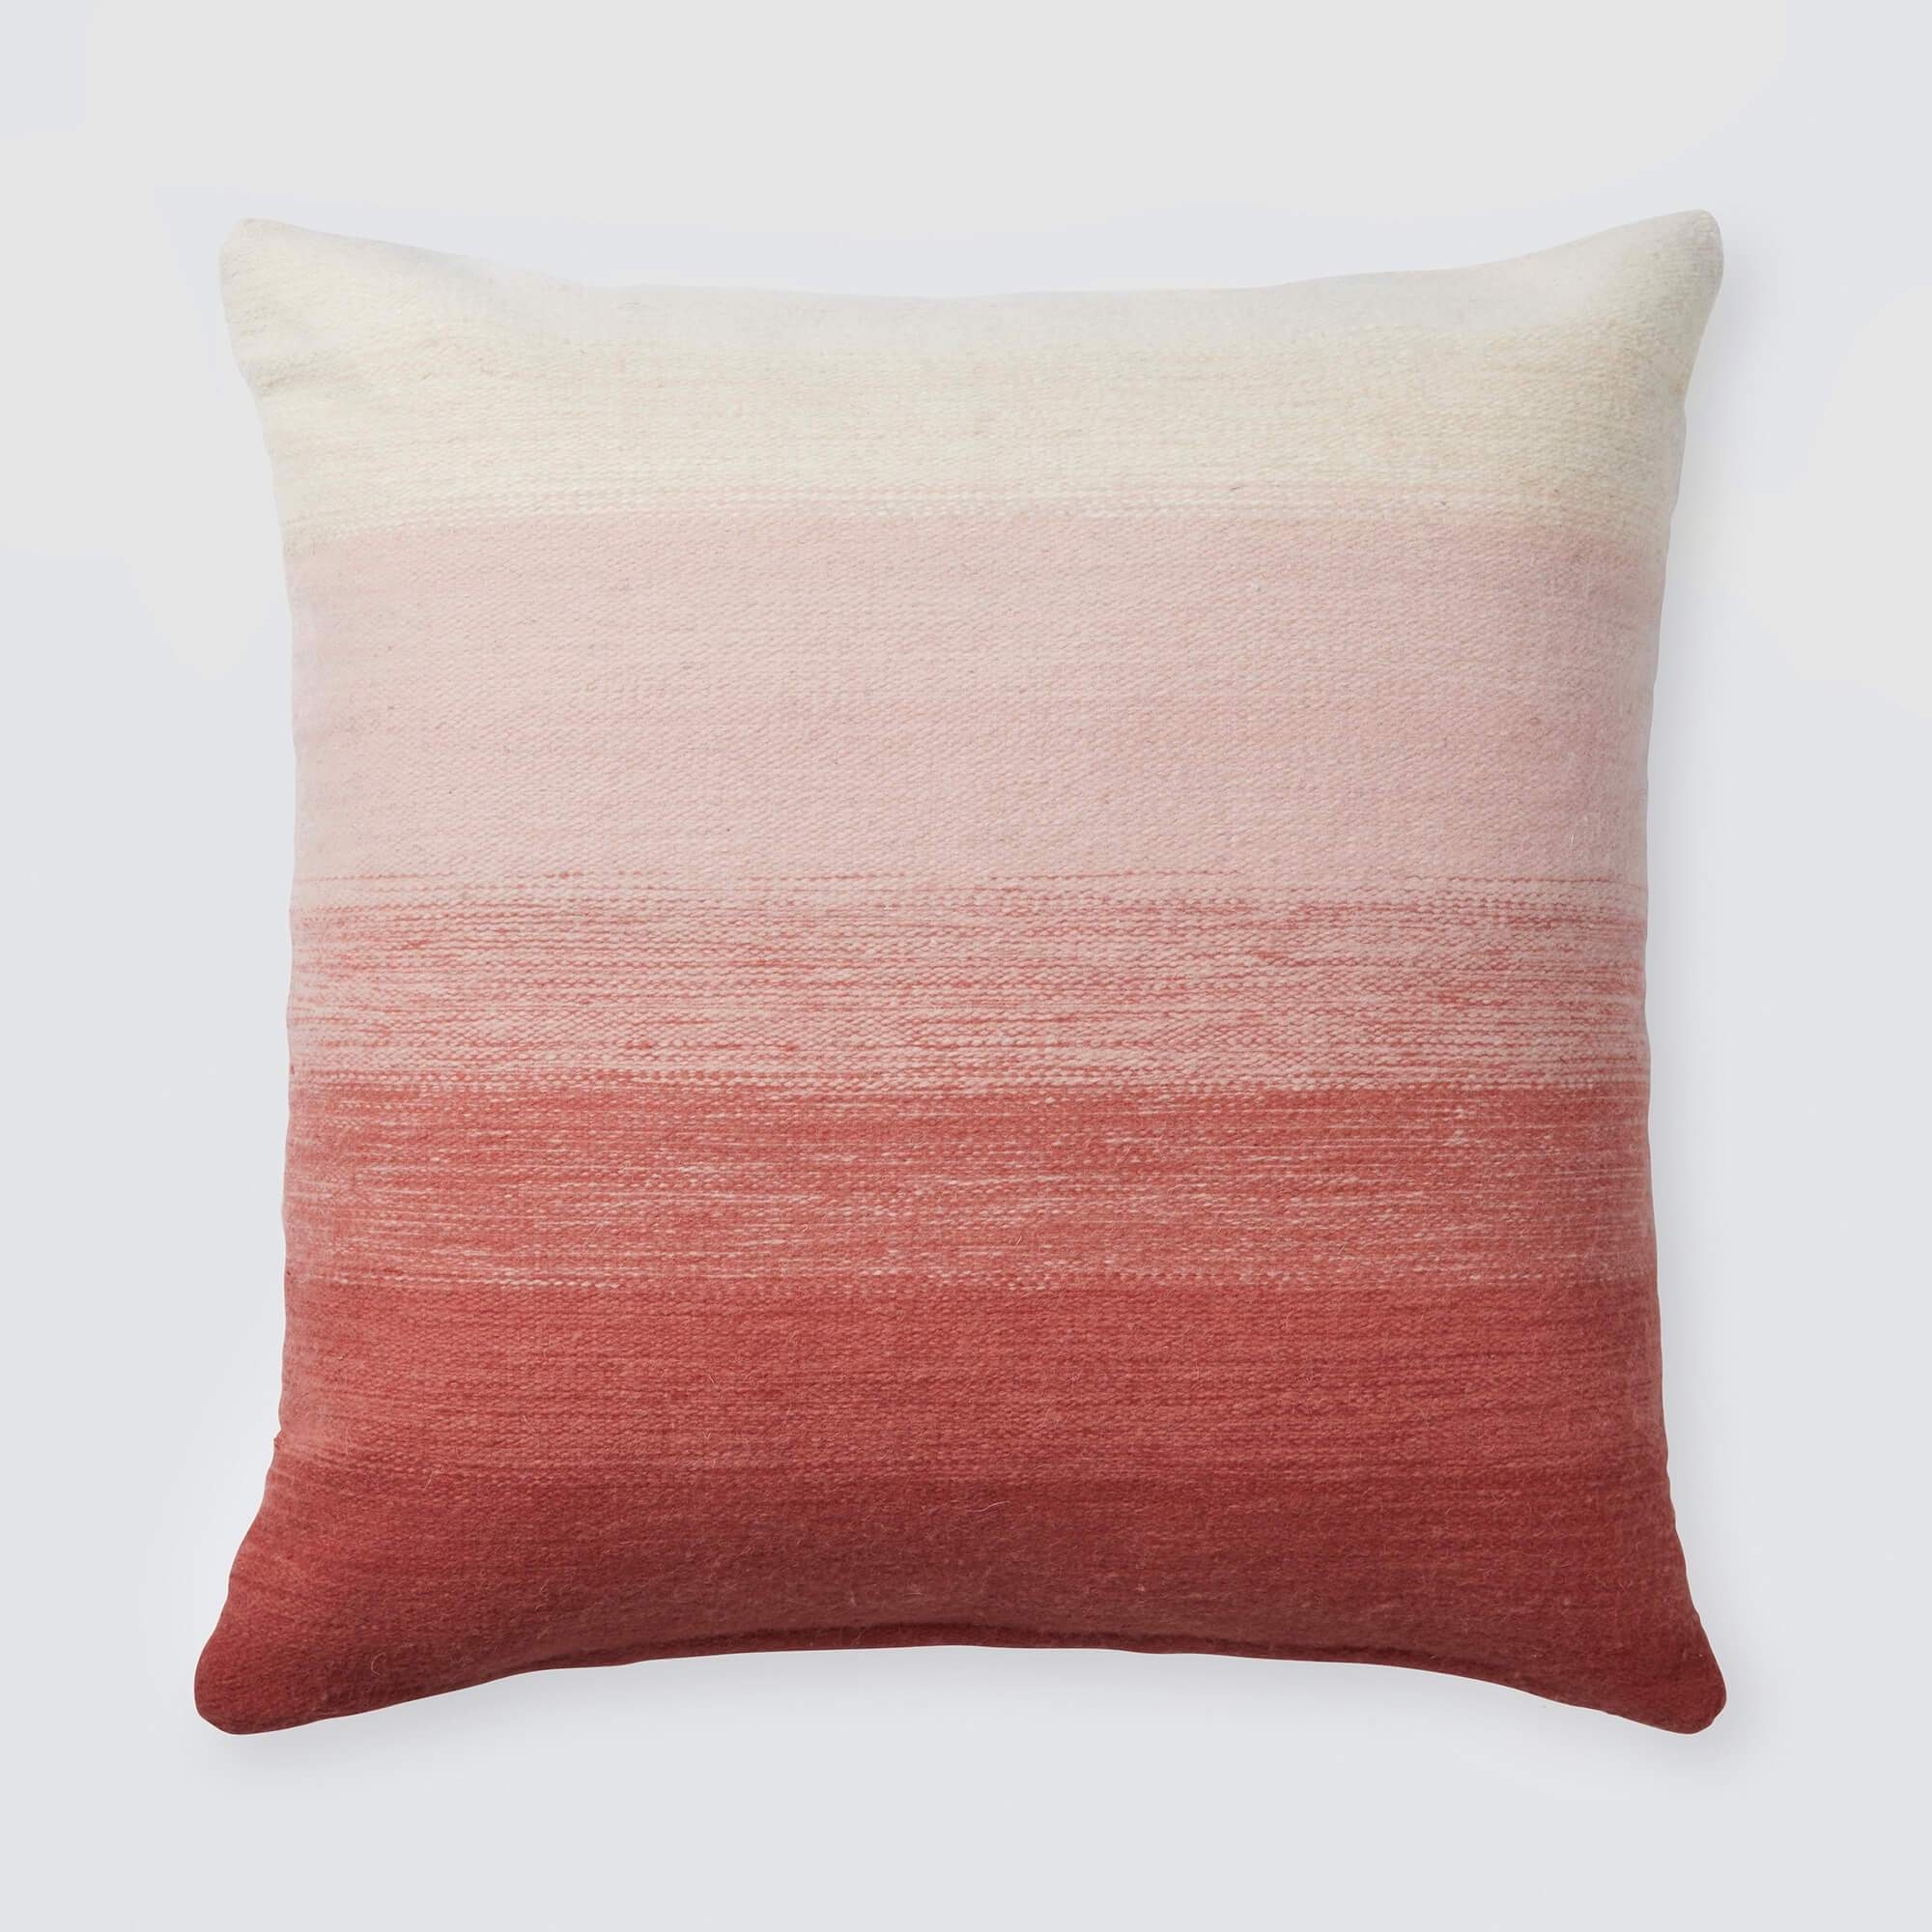 The Citizenry Marea Pillow | 18" x 18" | Made You Blush - Image 0